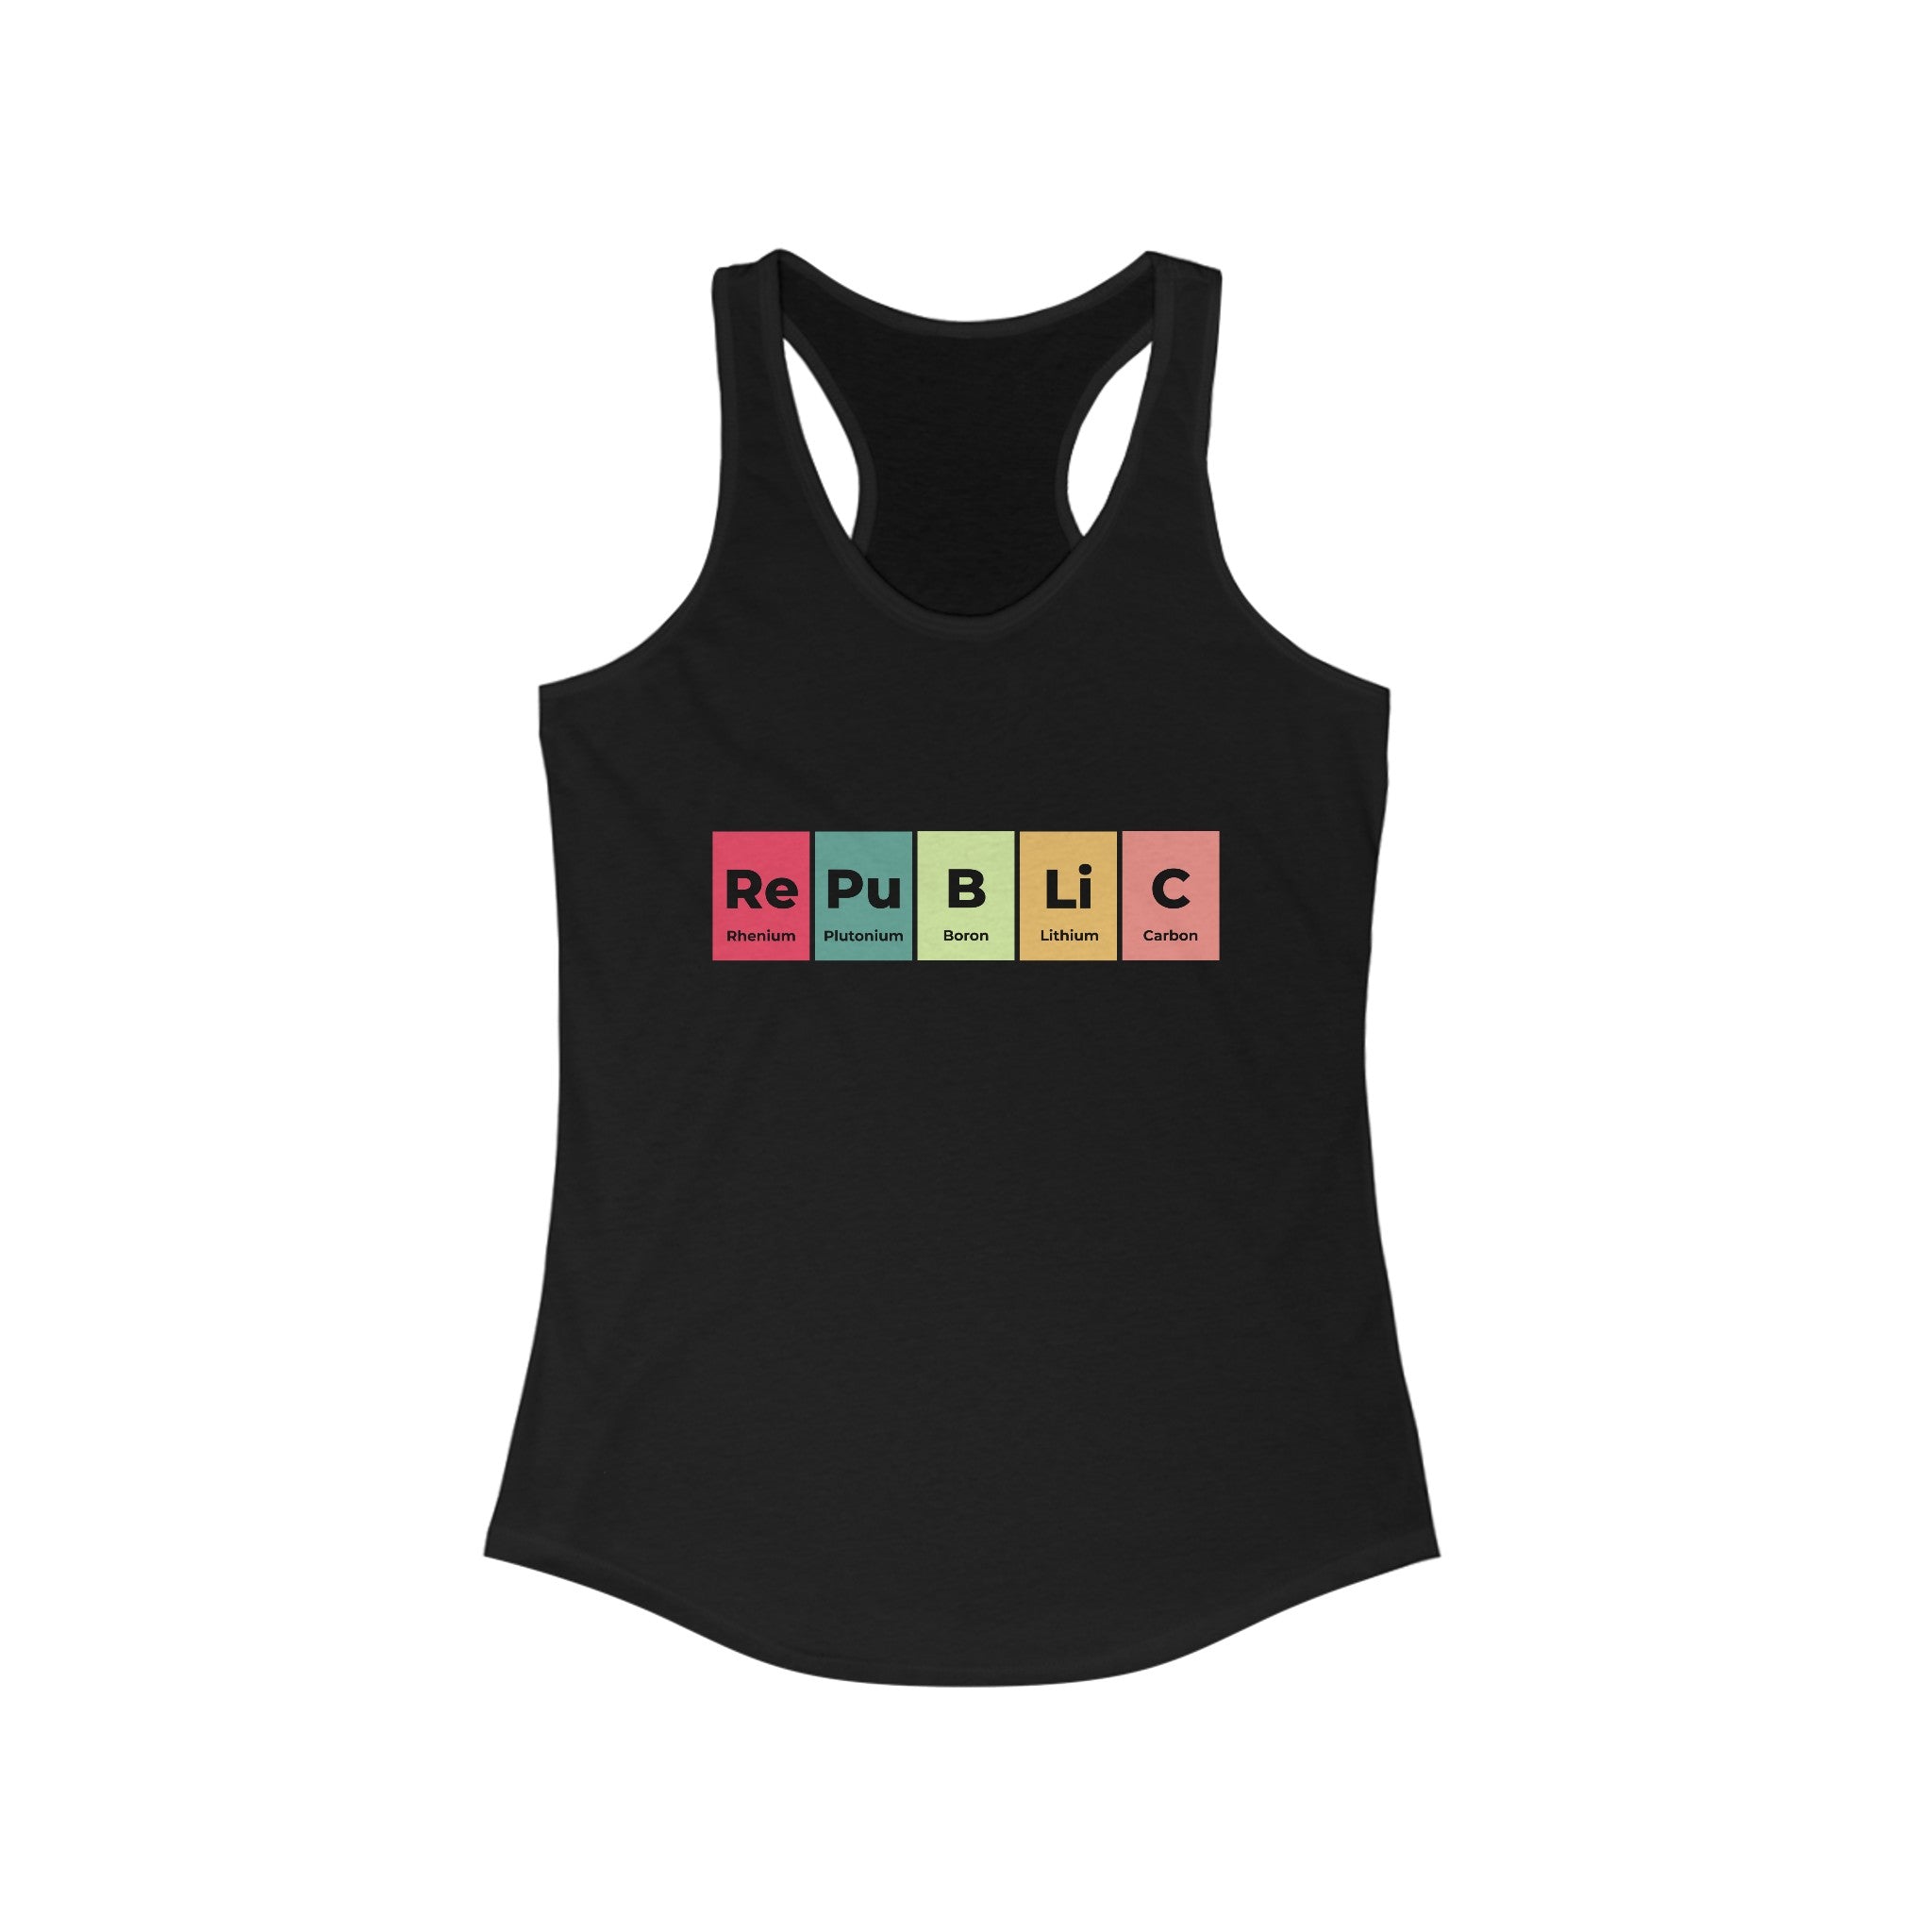 Lightweight black Republic - Women's Racerback Tank featuring the term "Republic" spelled out using colorful blocks styled like elements from the periodic table, perfect for your fitness journey.